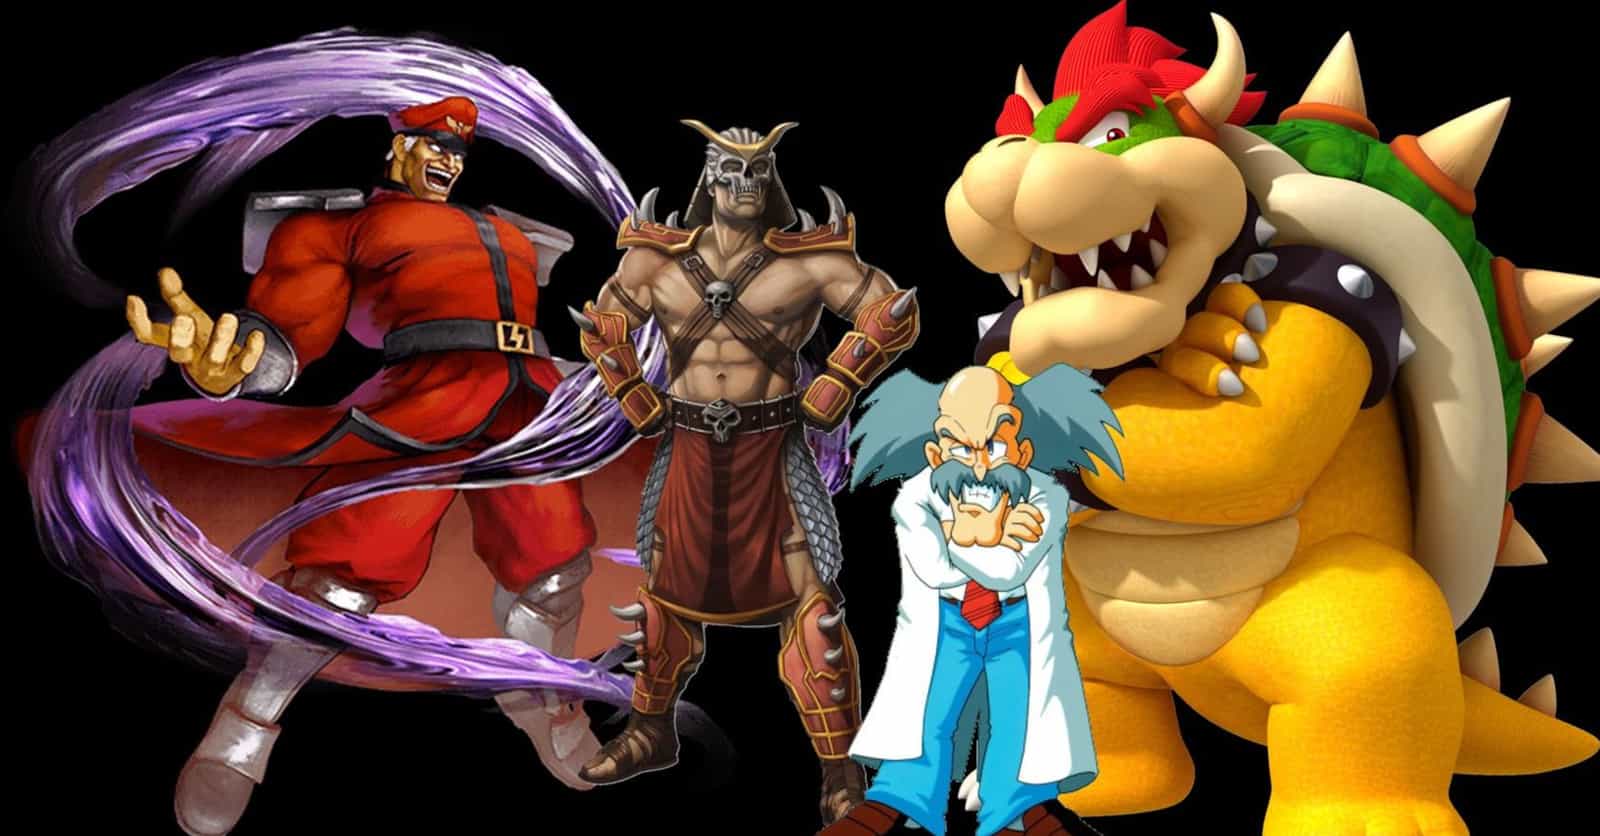 Which Video Game Villain Would You Be According To Your Zodiac Sign?